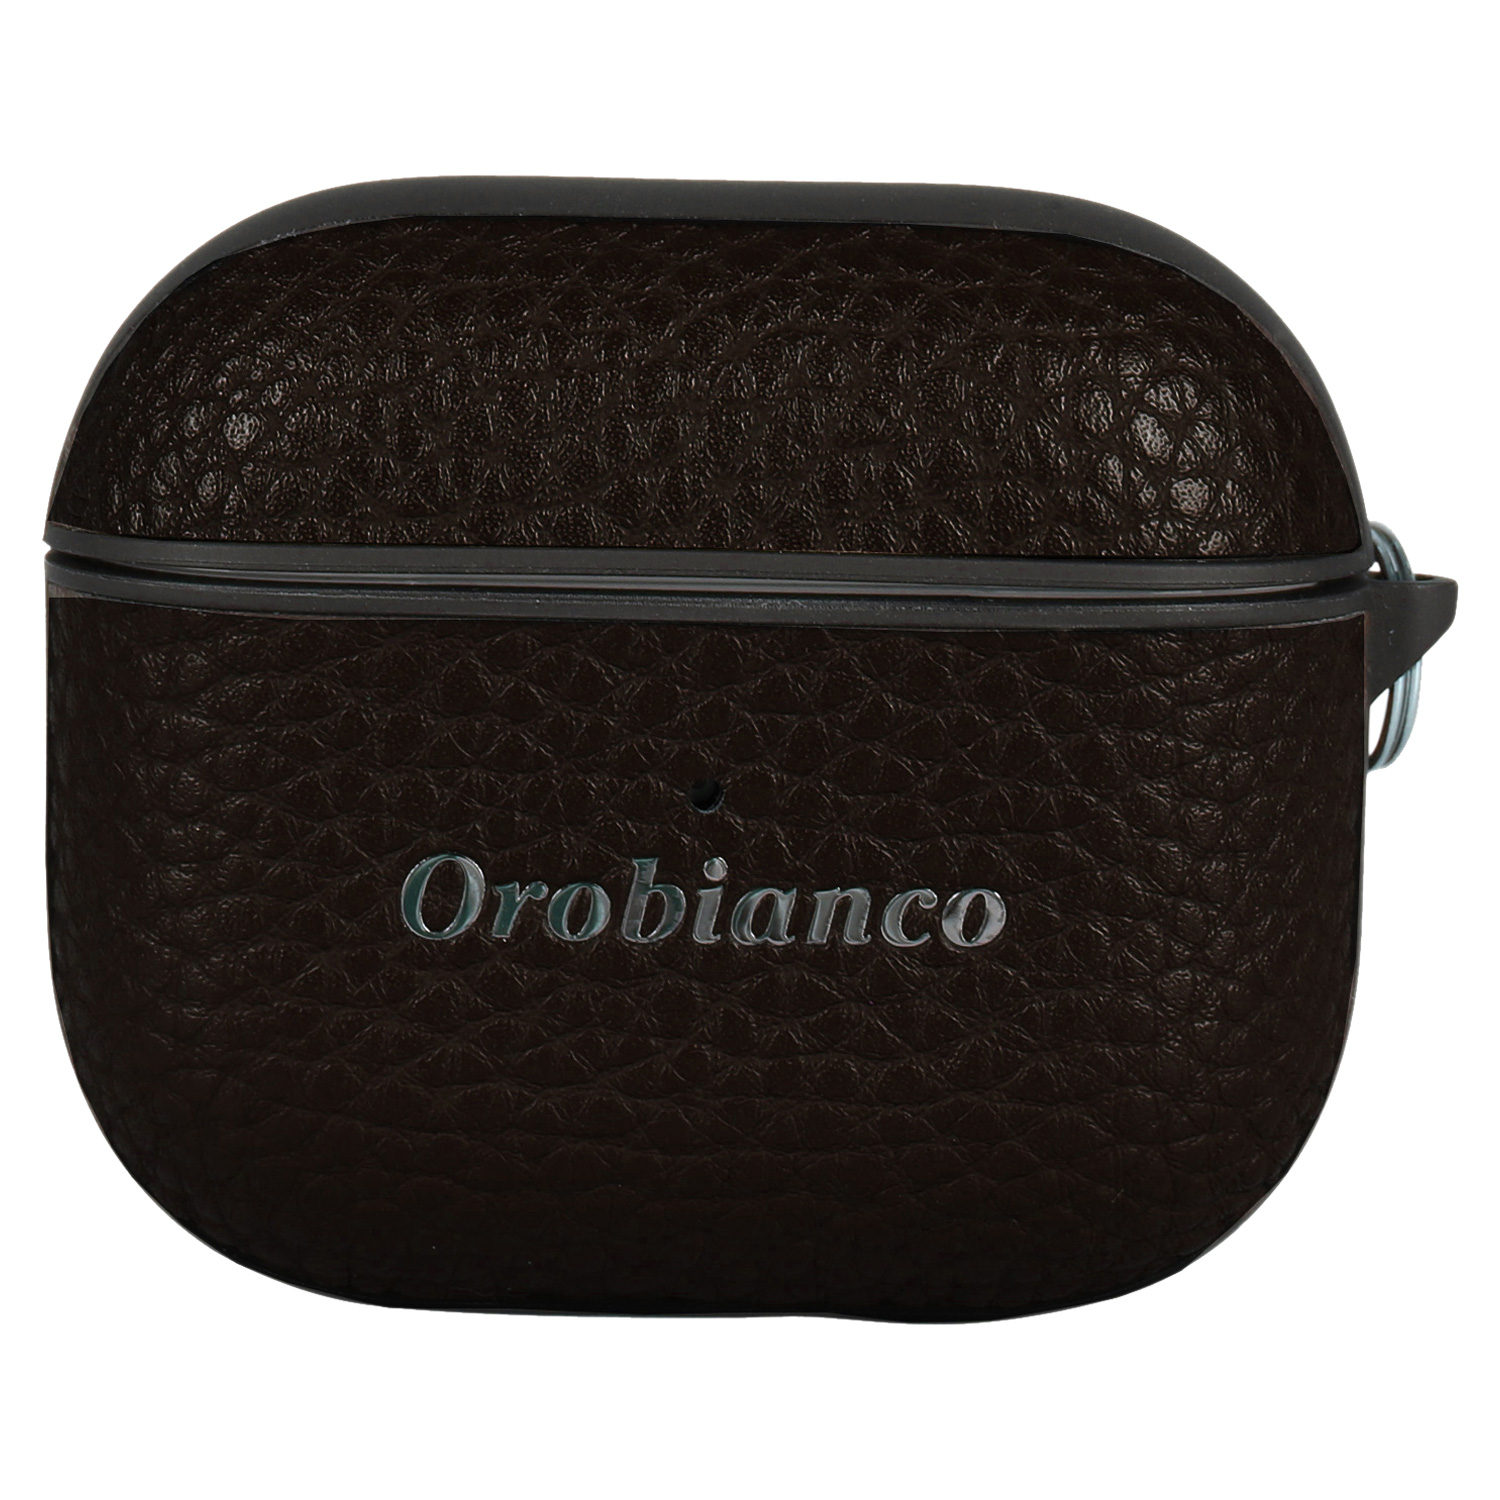 Orobianco オロビアンコ エアーポッズプロ AirPodsケース カバー メンズ PU LEATHER AIRPODS CASE｜sugaronlineshop｜02